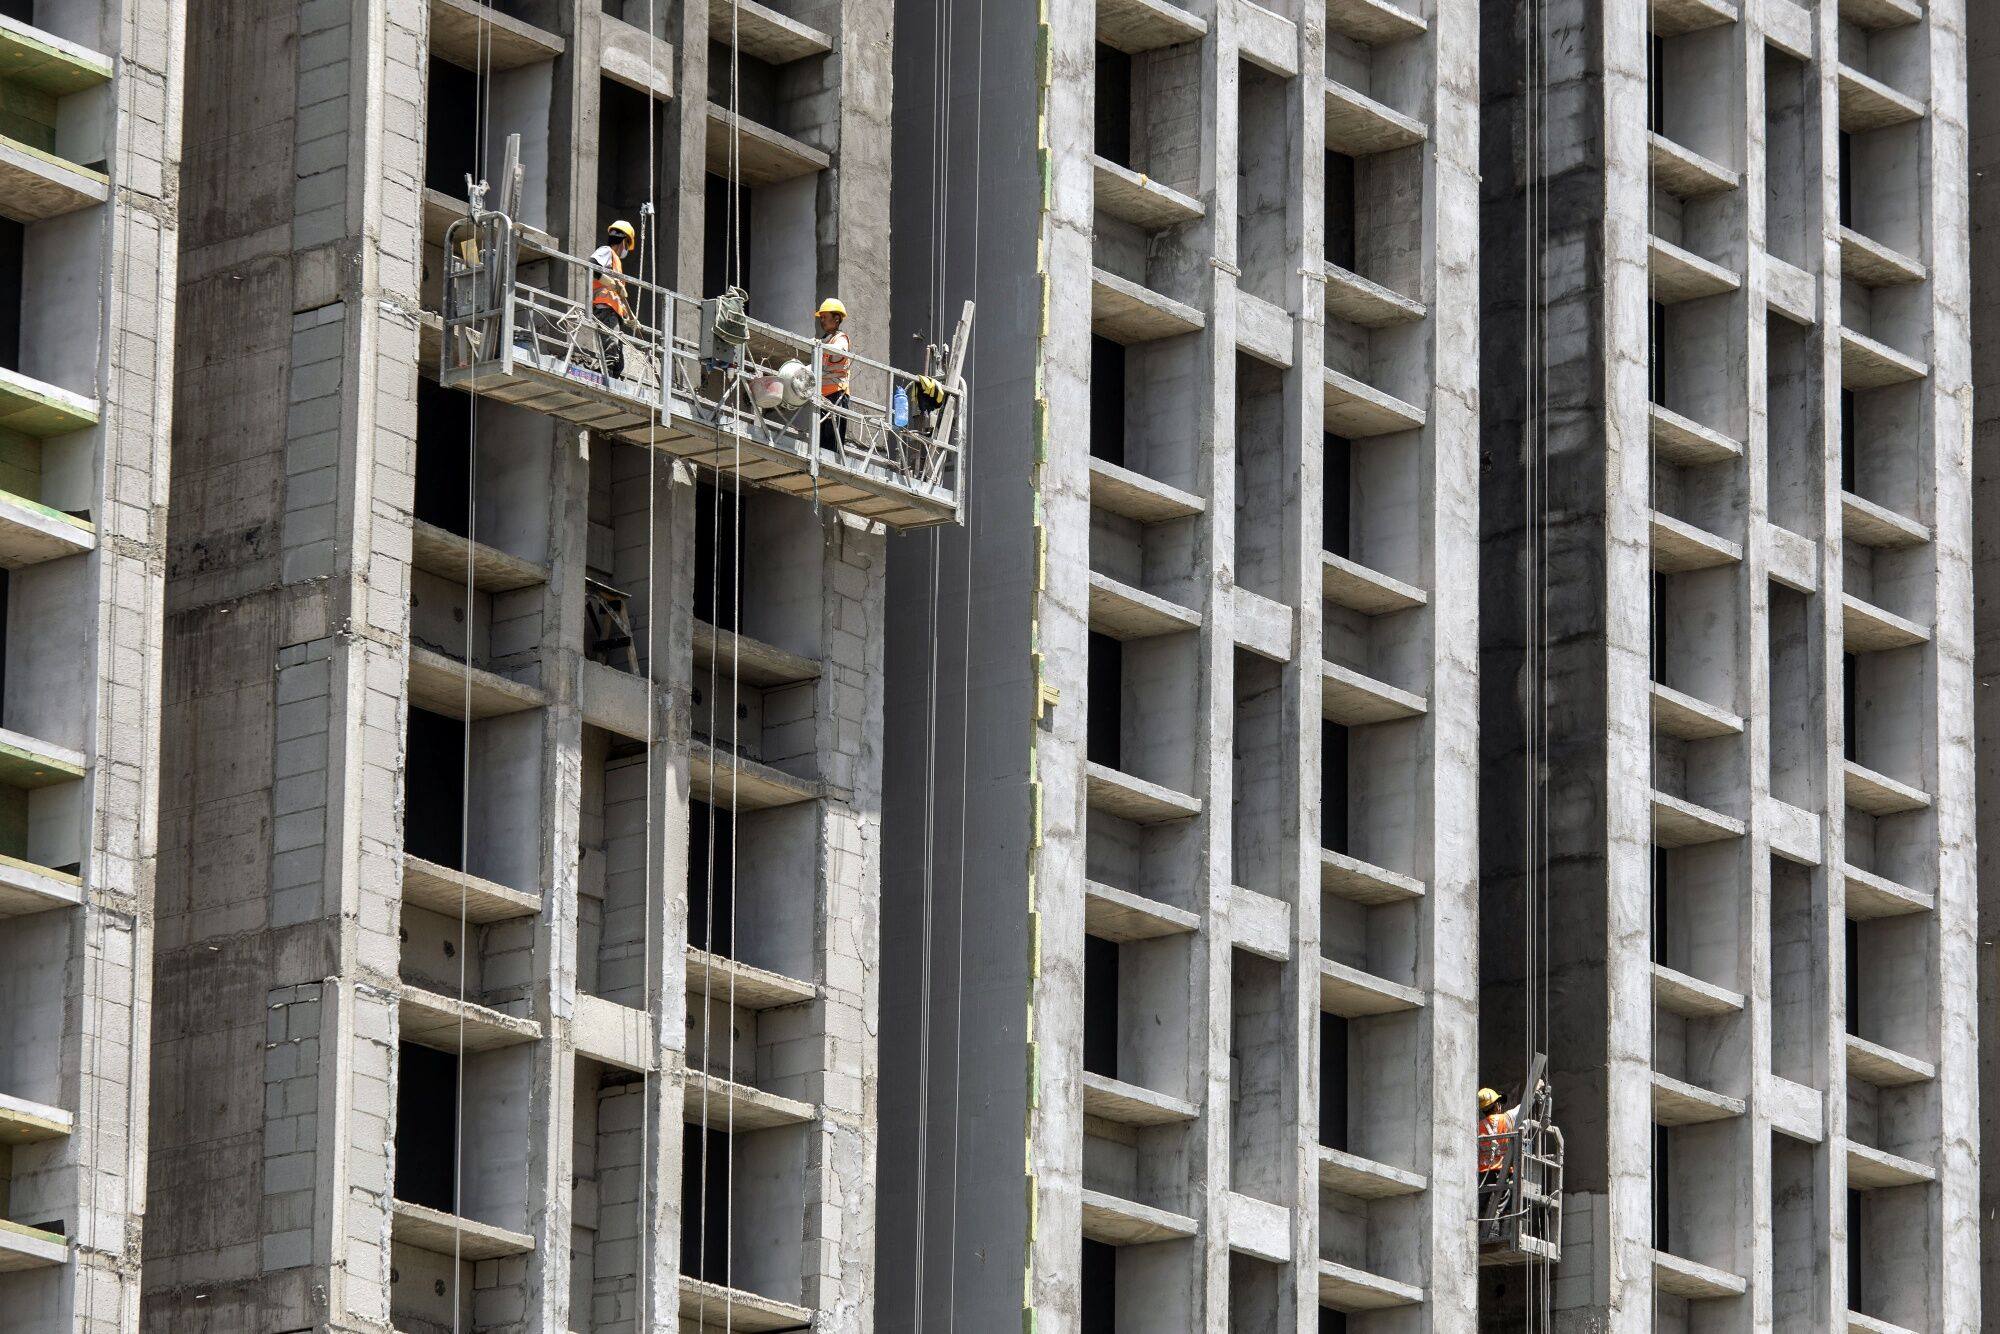 Some of China’s financially weaker regions, including Henan province, are looking to replenish local banks’ balance sheets amid a property market downturn. Photo: Bloomberg